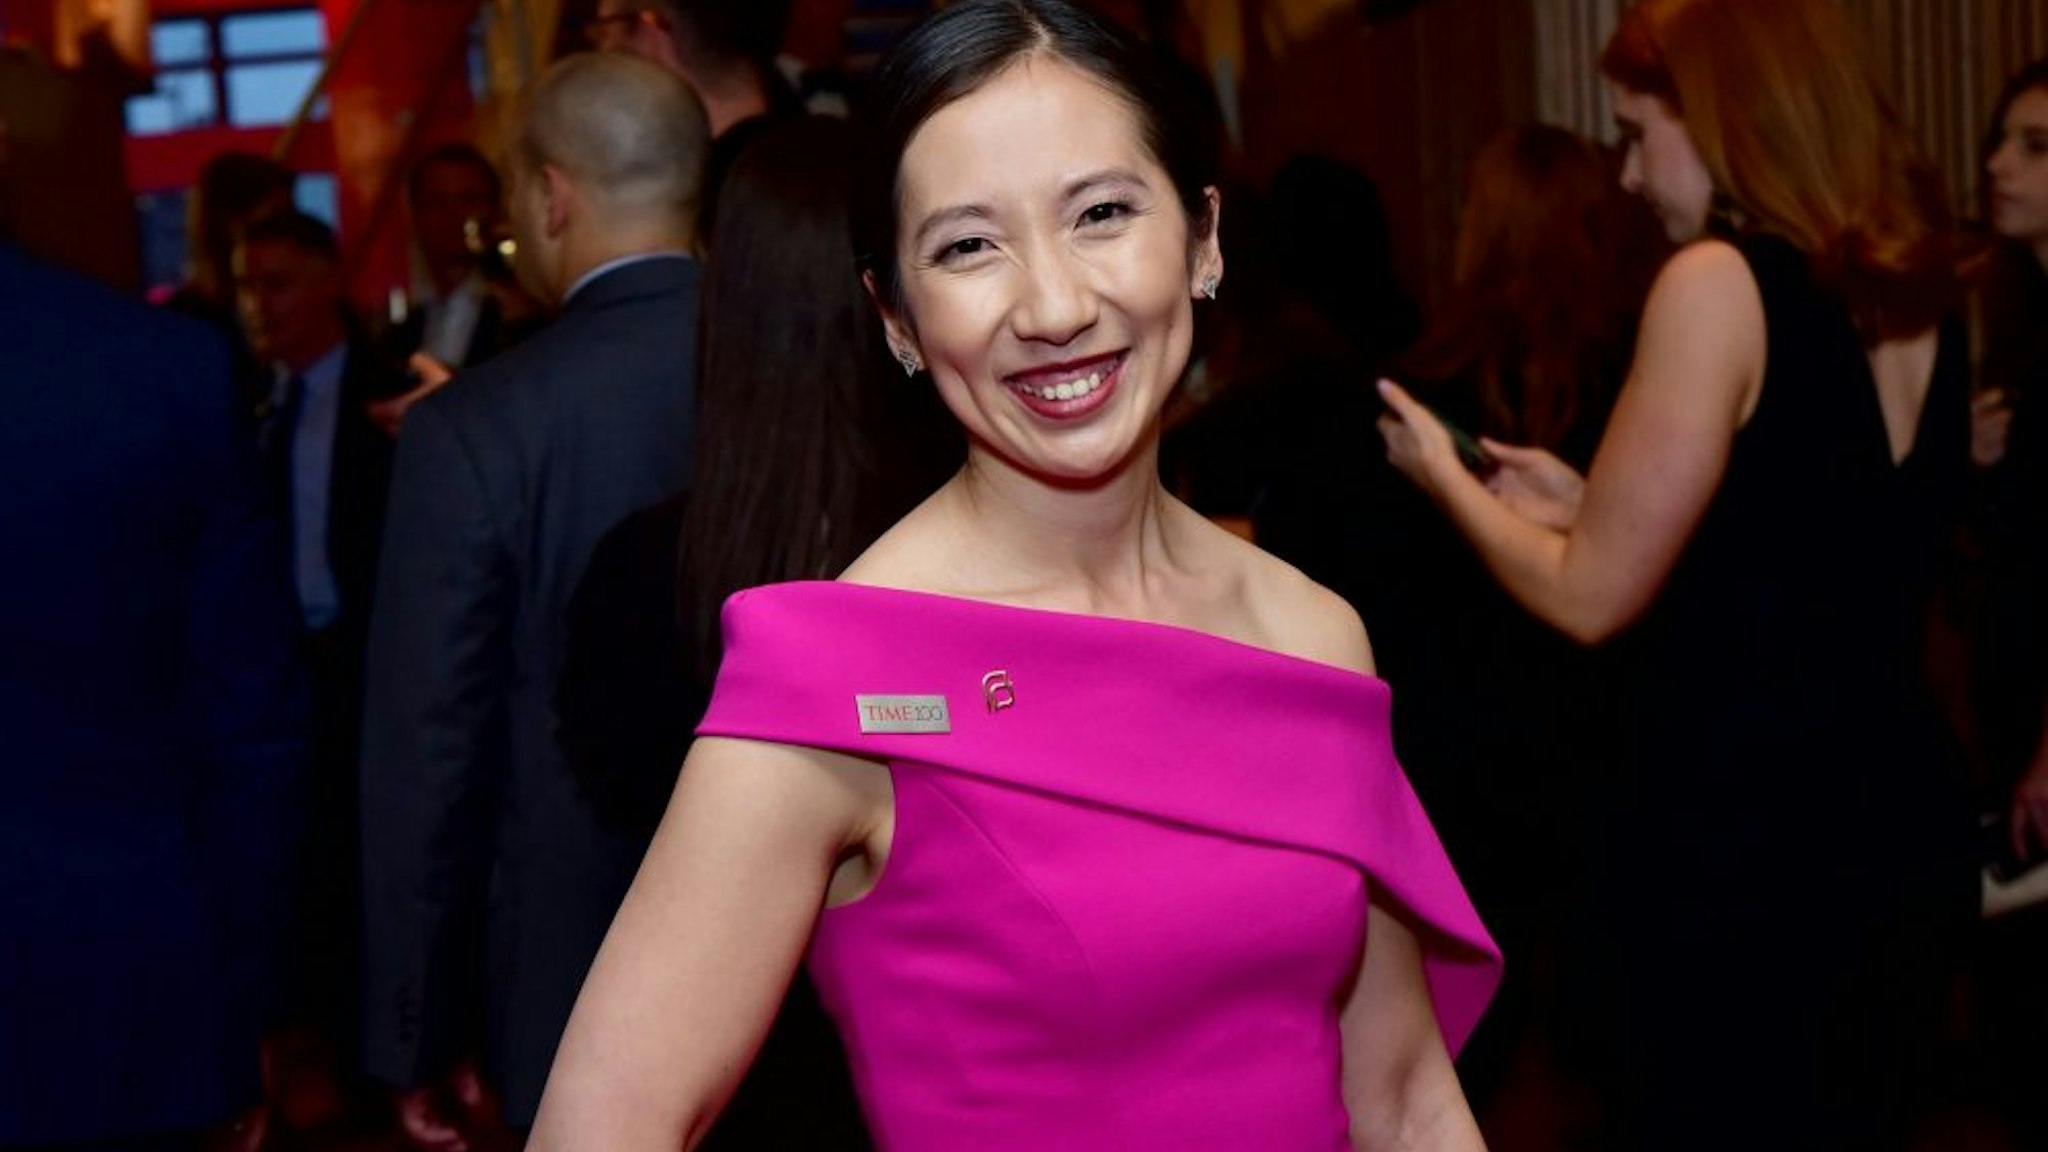 NEW YORK, NEW YORK - APRIL 23: Dr. Leana Wen attends the Time 100 Gala 2019 at Jazz at Lincoln Center on April 23, 2019 in New York City.